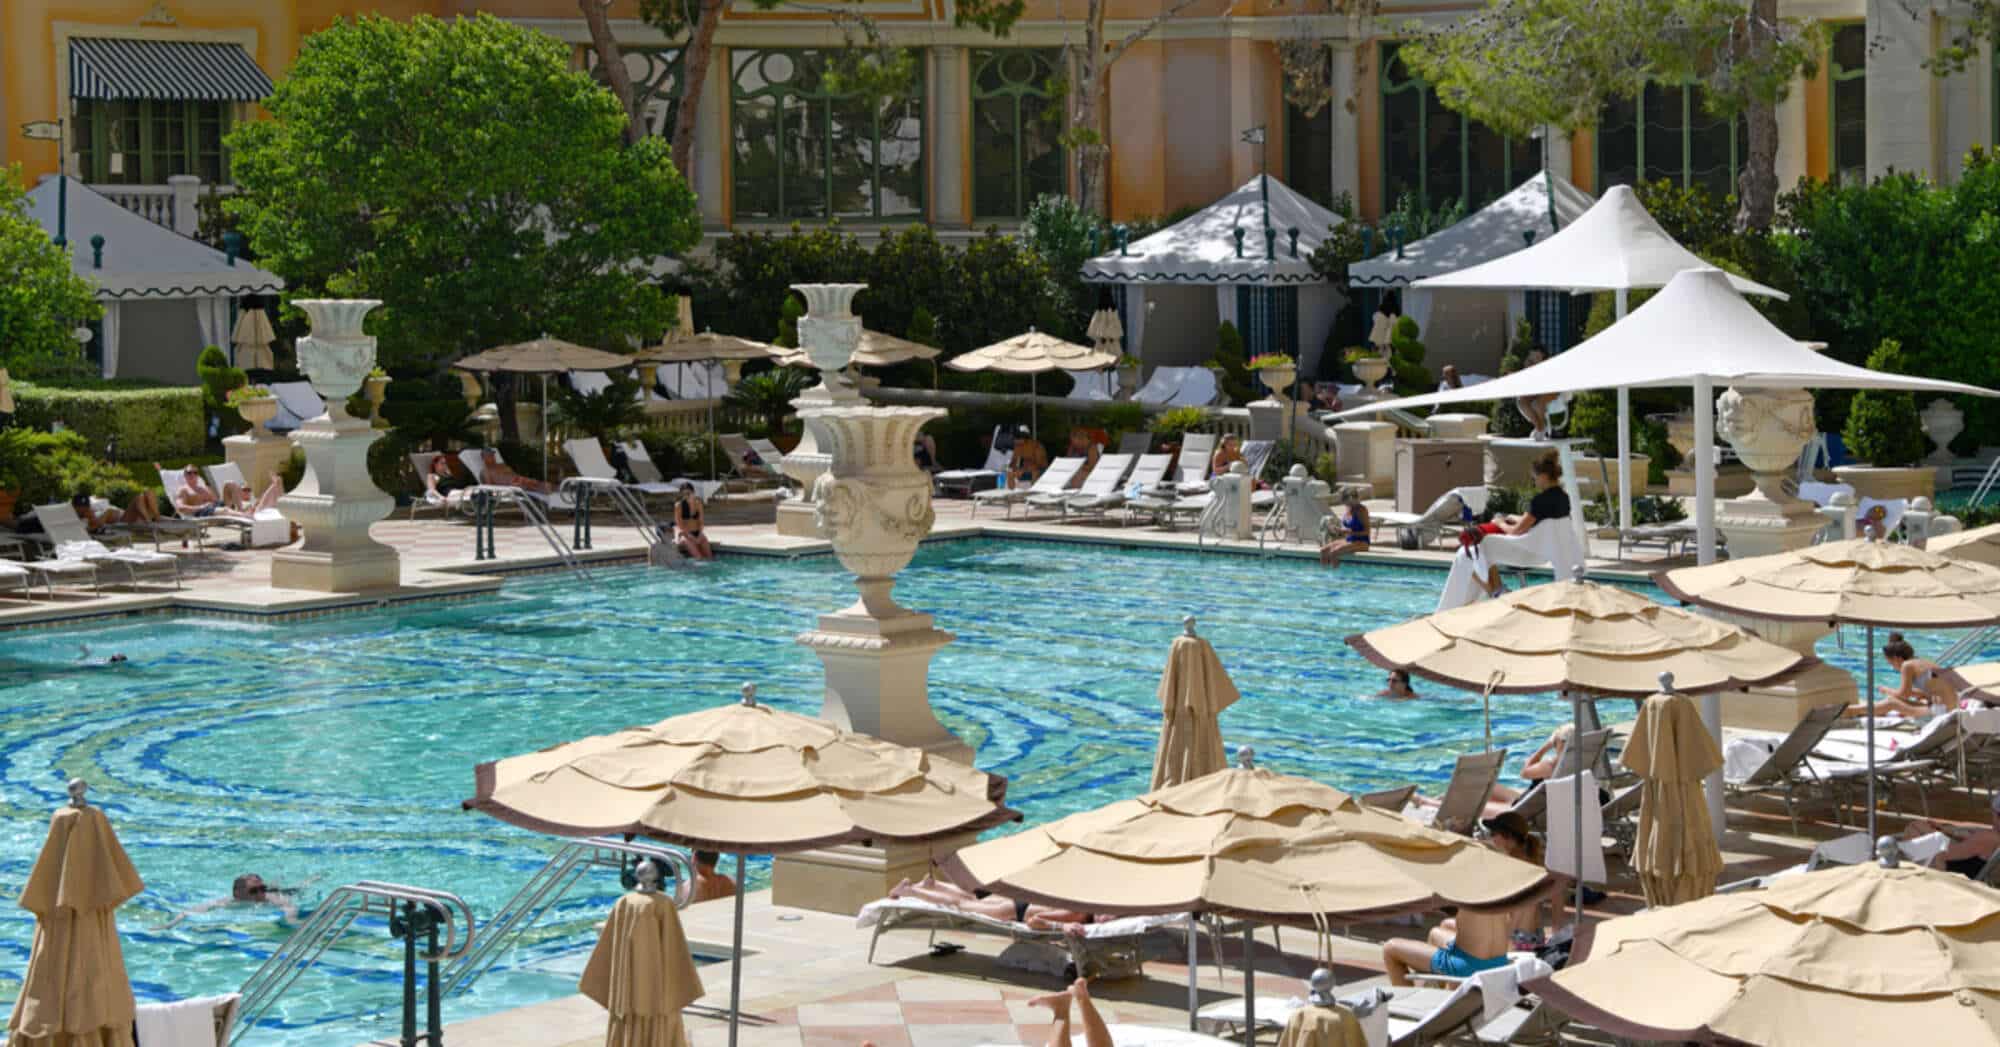 The Best Pools in Las Vegas: Take the Plunge